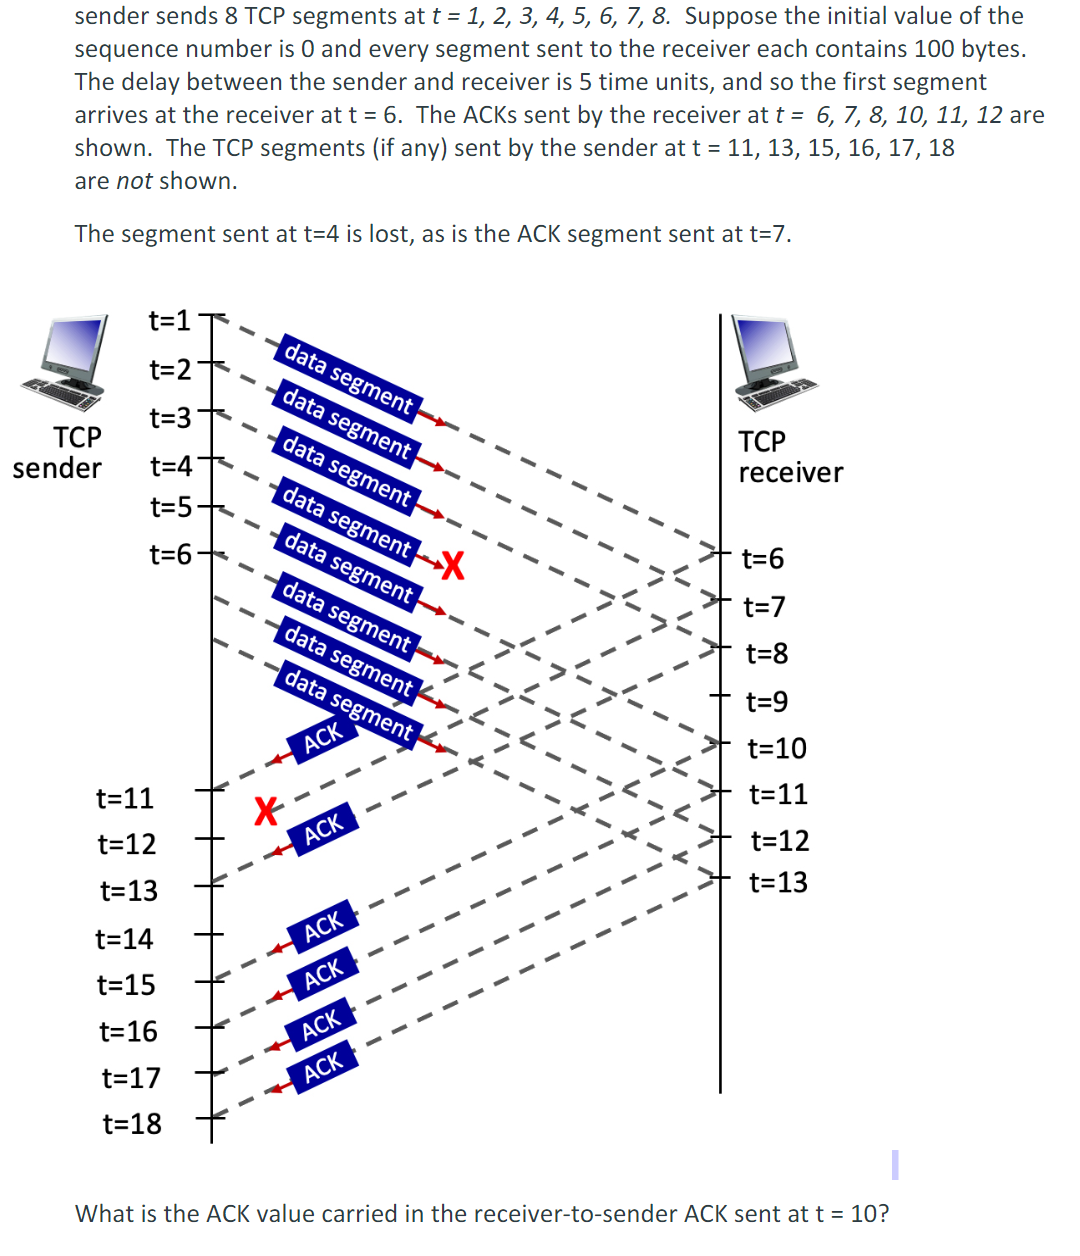 sender sends 8 TCP segments at t = 1, 2, 3, 4, 5, 6, 7, 8. Suppose the initial value of the
sequence number is 0 and every segment sent to the receiver each contains 100 bytes.
The delay between the sender and receiver is 5 time units, and so the first segment
arrives at the receiver at t = 6. The ACKS sent by the receiver at t = 6, 7, 8, 10, 11, 12 are
shown. The TCP segments (if any) sent by the sender at t = 11, 13, 15, 16, 17, 18
are not shown.
The segment sent at t=4 is lost, as is the ACK segment sent at t=7.
TCP
sender
t=1
t=2+
t=3+
t=4
t=5+
t=6+
t=11
t=12
t=13
t=14
t=15
t=16
t=17
t=18
1
data segment
data segment
data segment
data segment
data segment-
data segment
data segment
data segment
ACK
ACK
ACK
ACK
ACK
ACK
I
K
V
1
1
ttt
TCP
receiver
t=6
t=7
t=8
t=9
t=10
t=11
t=12
t=13
What is the ACK value carried in the receiver-to-sender ACK sent at t = 10?